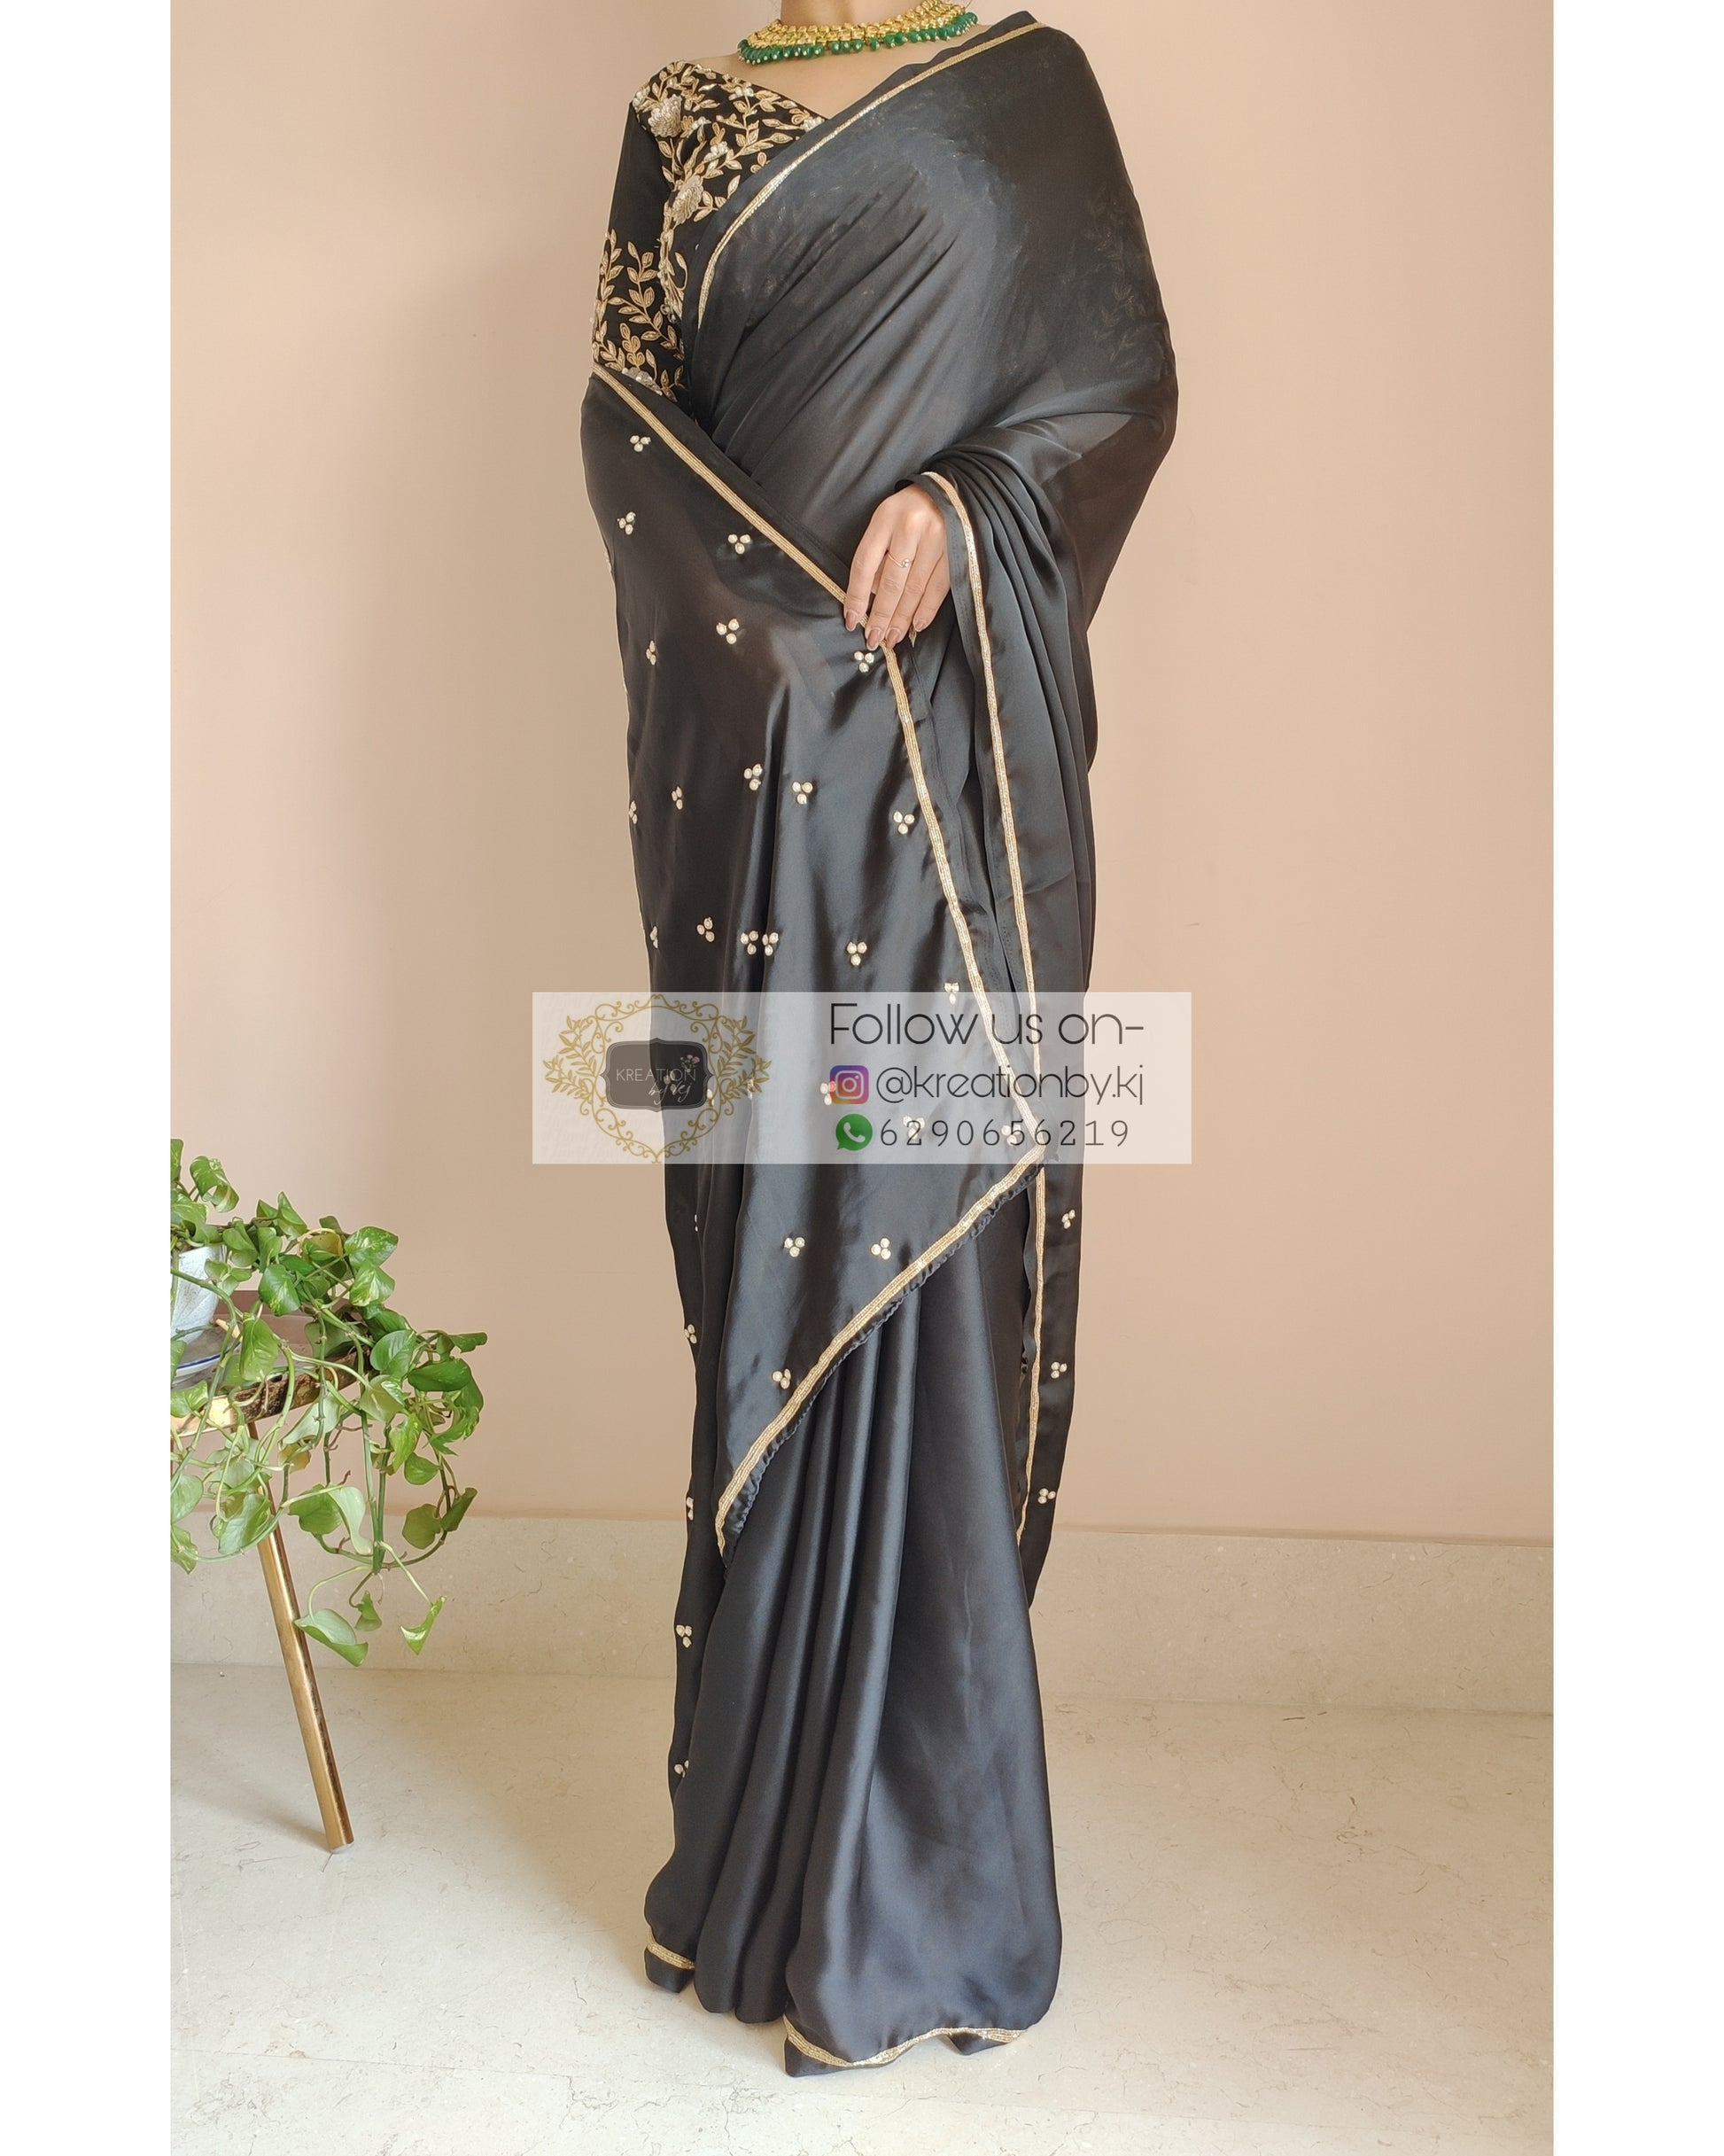 Black Crepe Silk Saree With Heavily Embroidered Blouse - kreationbykj